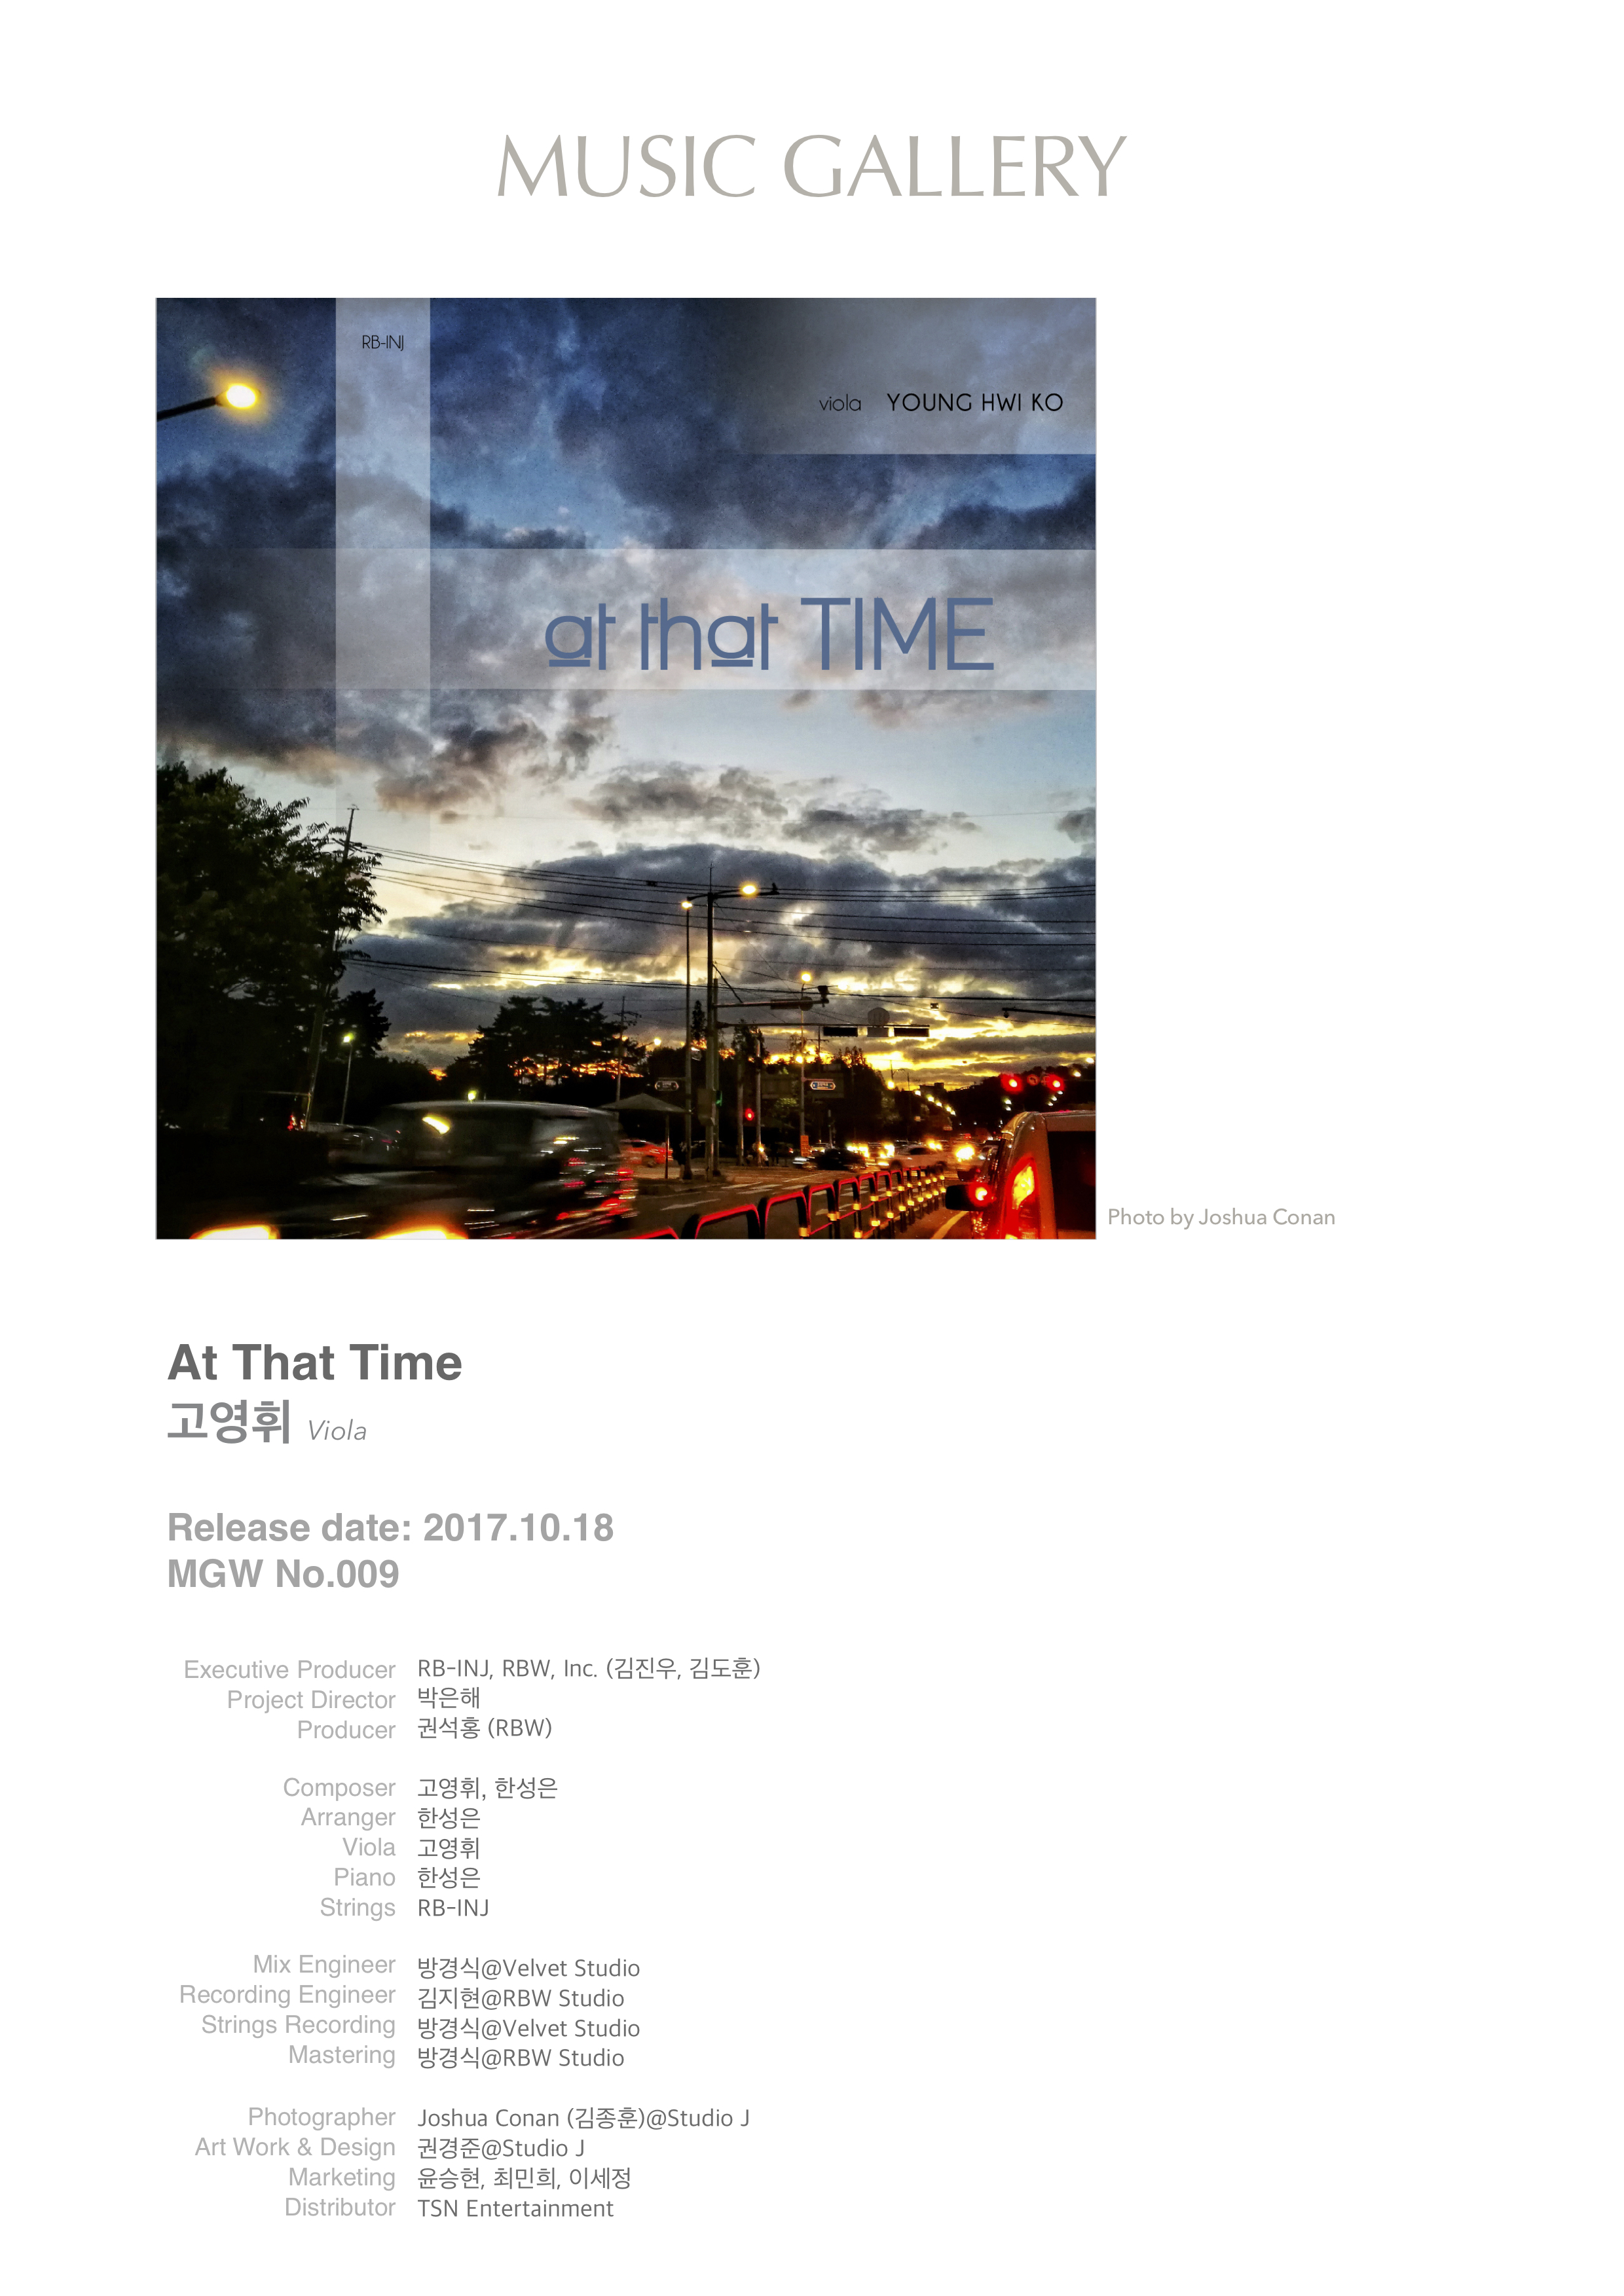 MGW 009 - At That Time - Ko Youngwhi.jpg